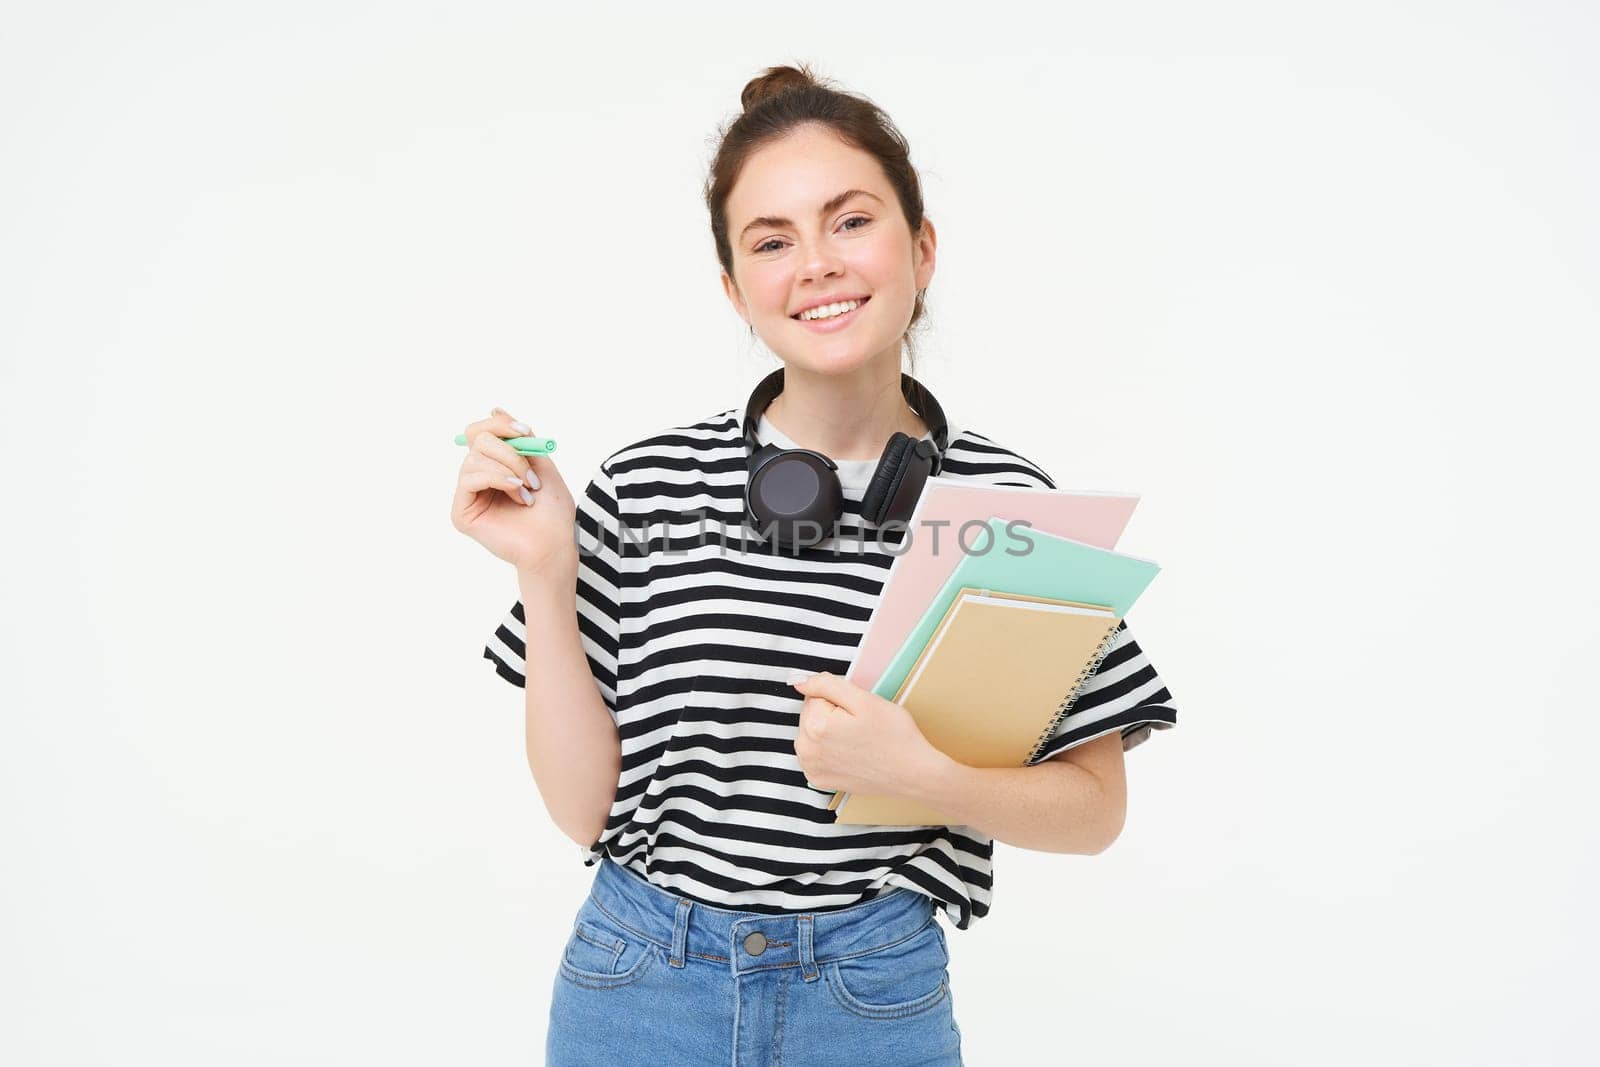 Image of young woman, tutor with books and notebooks, wearing headphones over her neck, isolated on white background. Student lifestyle concept.